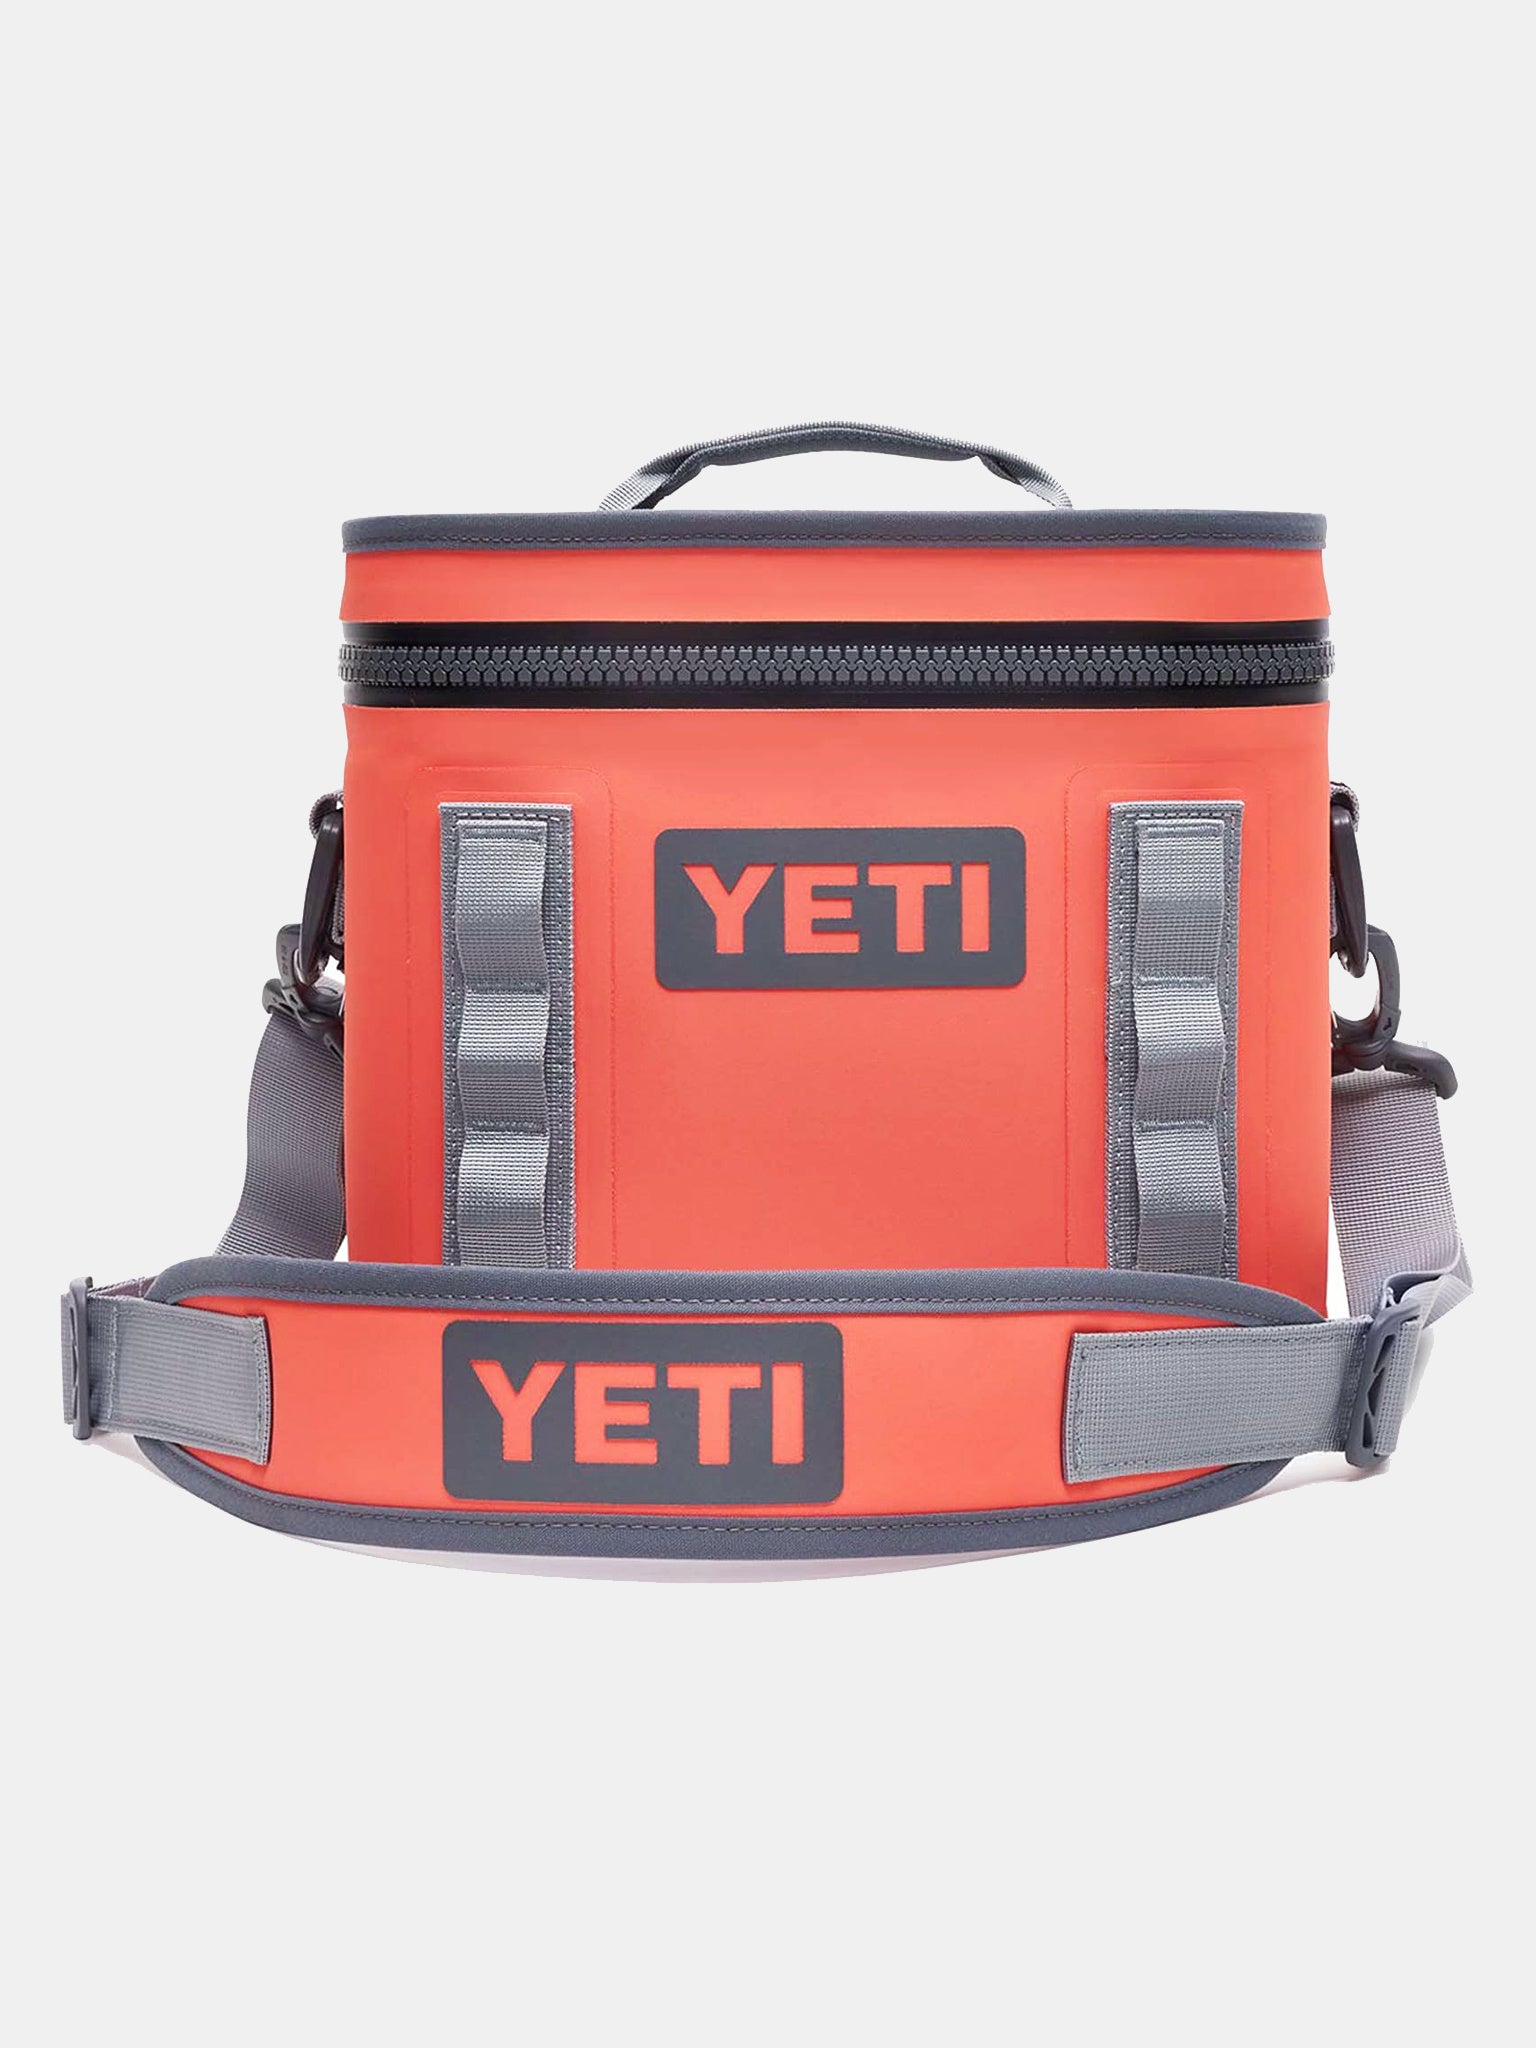 Yeti Camino 35 vs 20. Got the 20 for my wife. : r/YetiCoolers